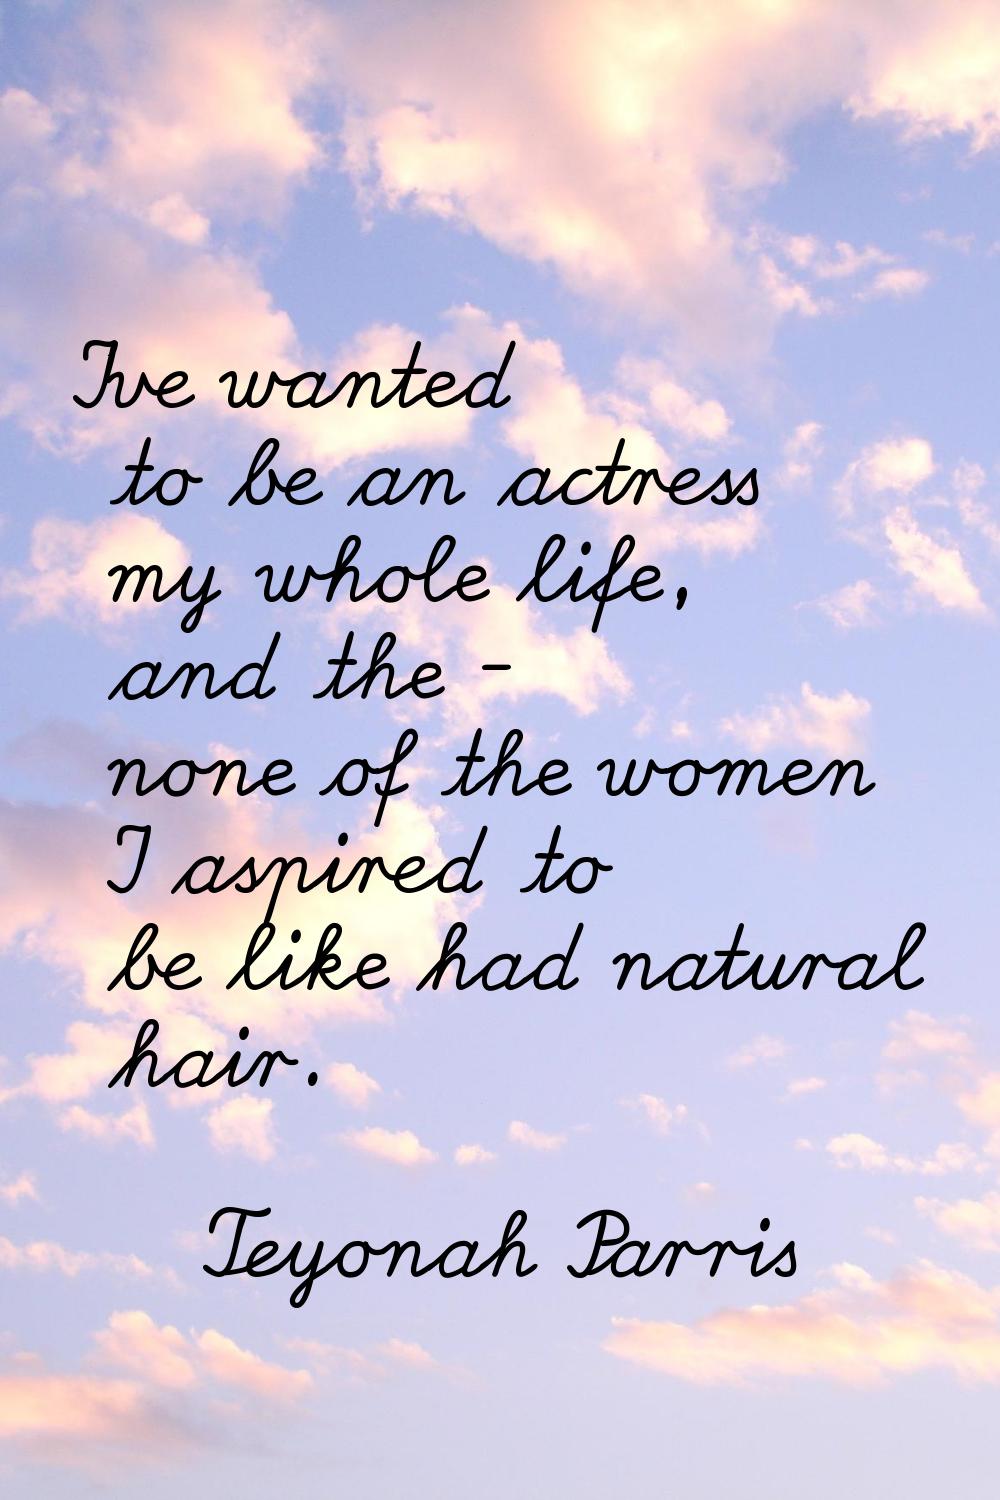 I've wanted to be an actress my whole life, and the - none of the women I aspired to be like had na